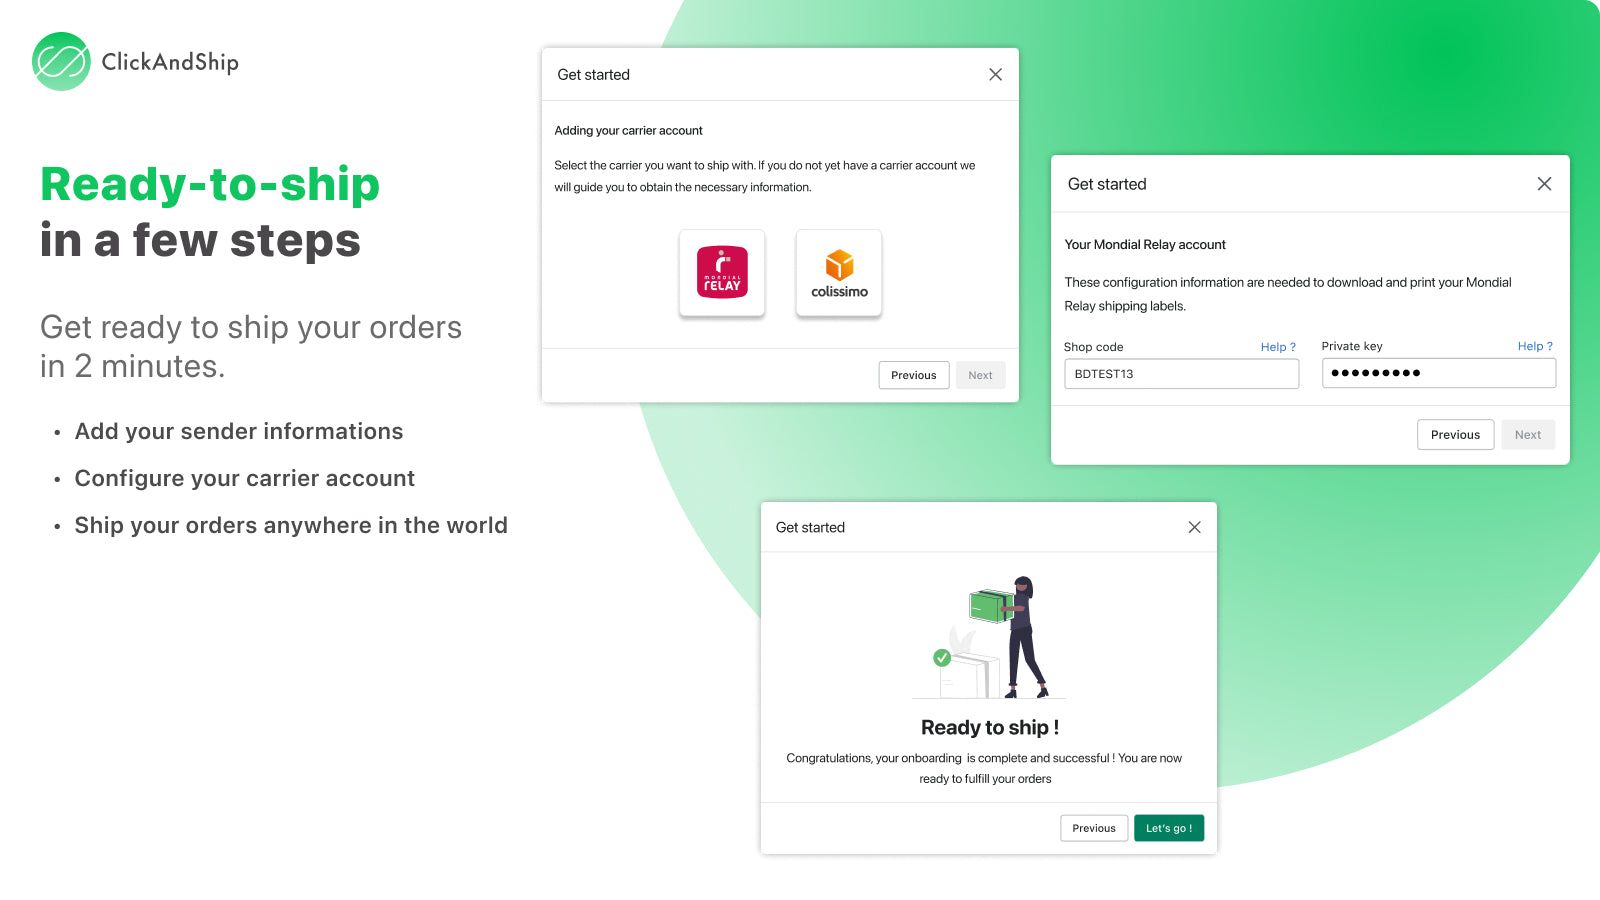 ClickAndShip - ready to ship in a few steps